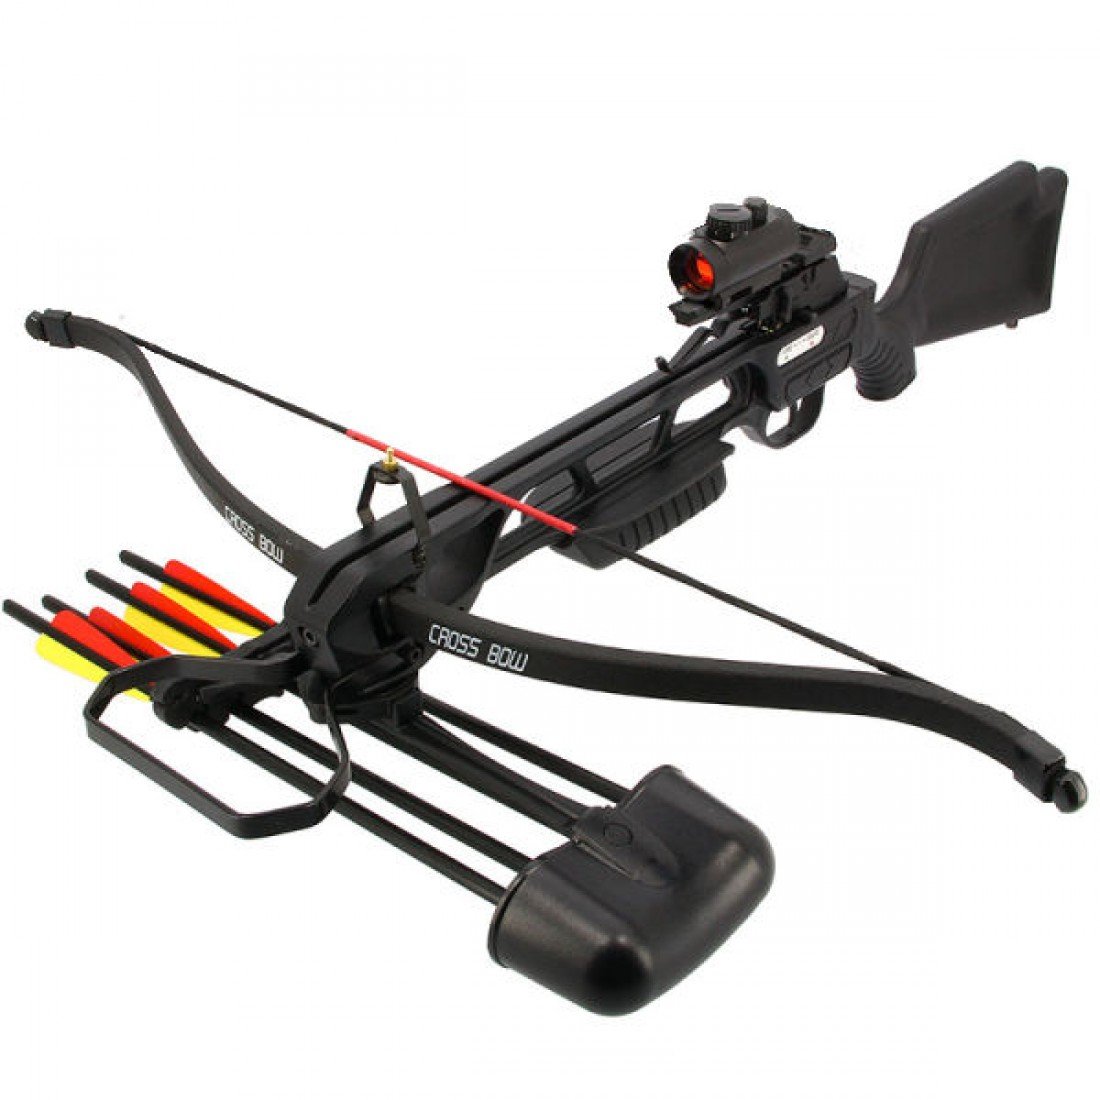 175lb Jaguar Crossbow Rifle Camouflage Or Black Kit With Red Dot Sight